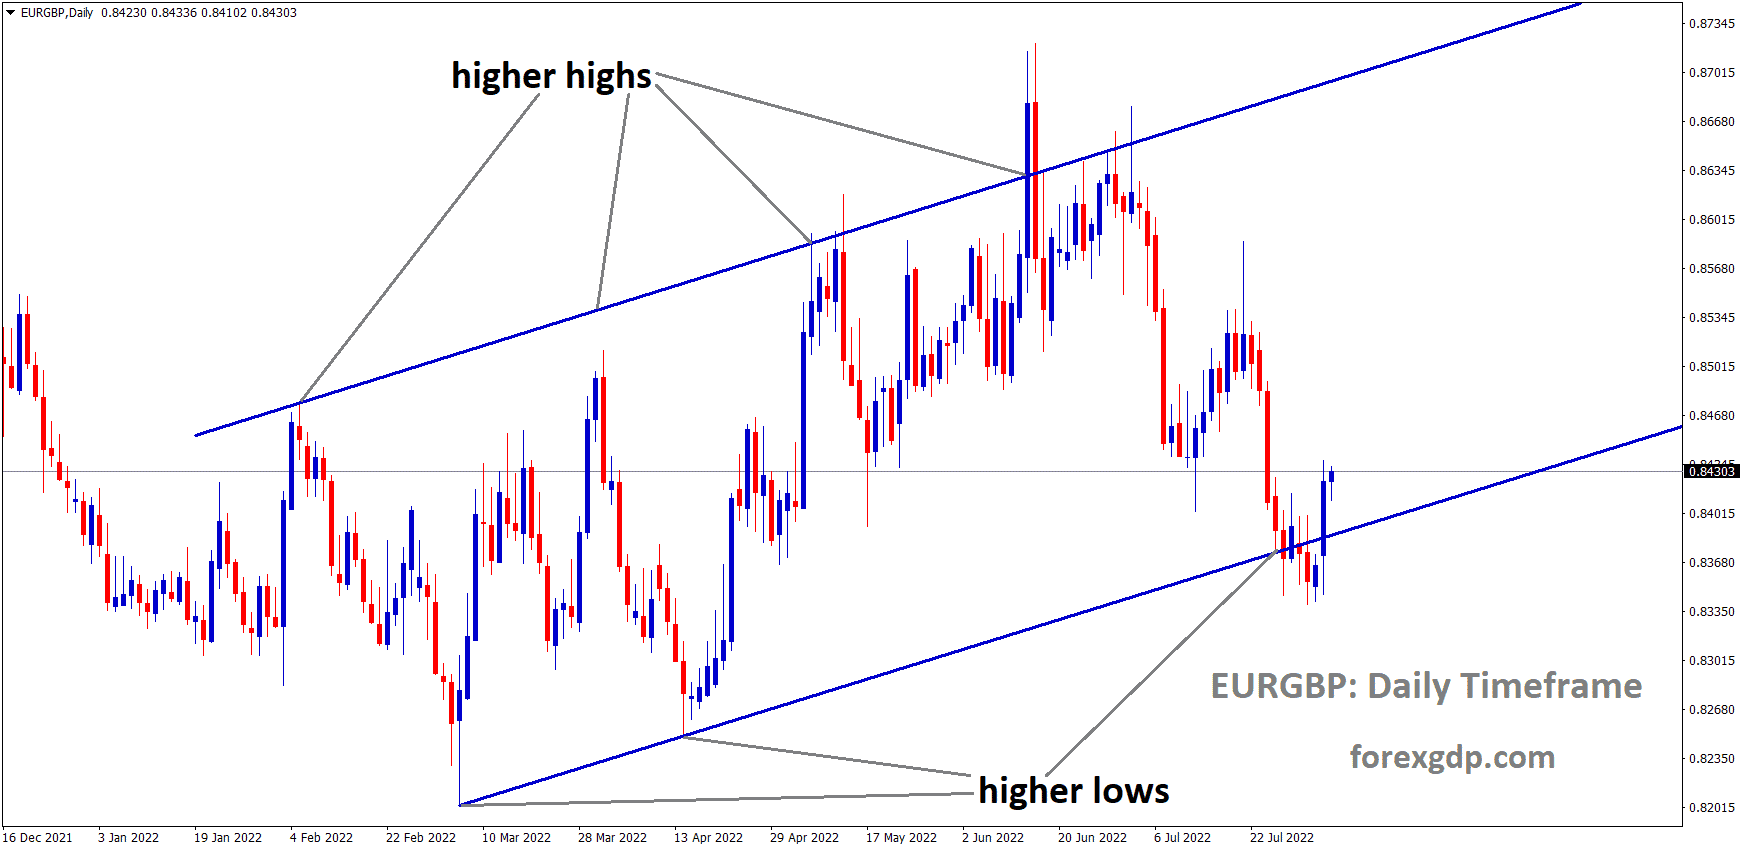 EURGBP is moving in an Ascending channel and the Market has rebounded from the higher low area of the channel